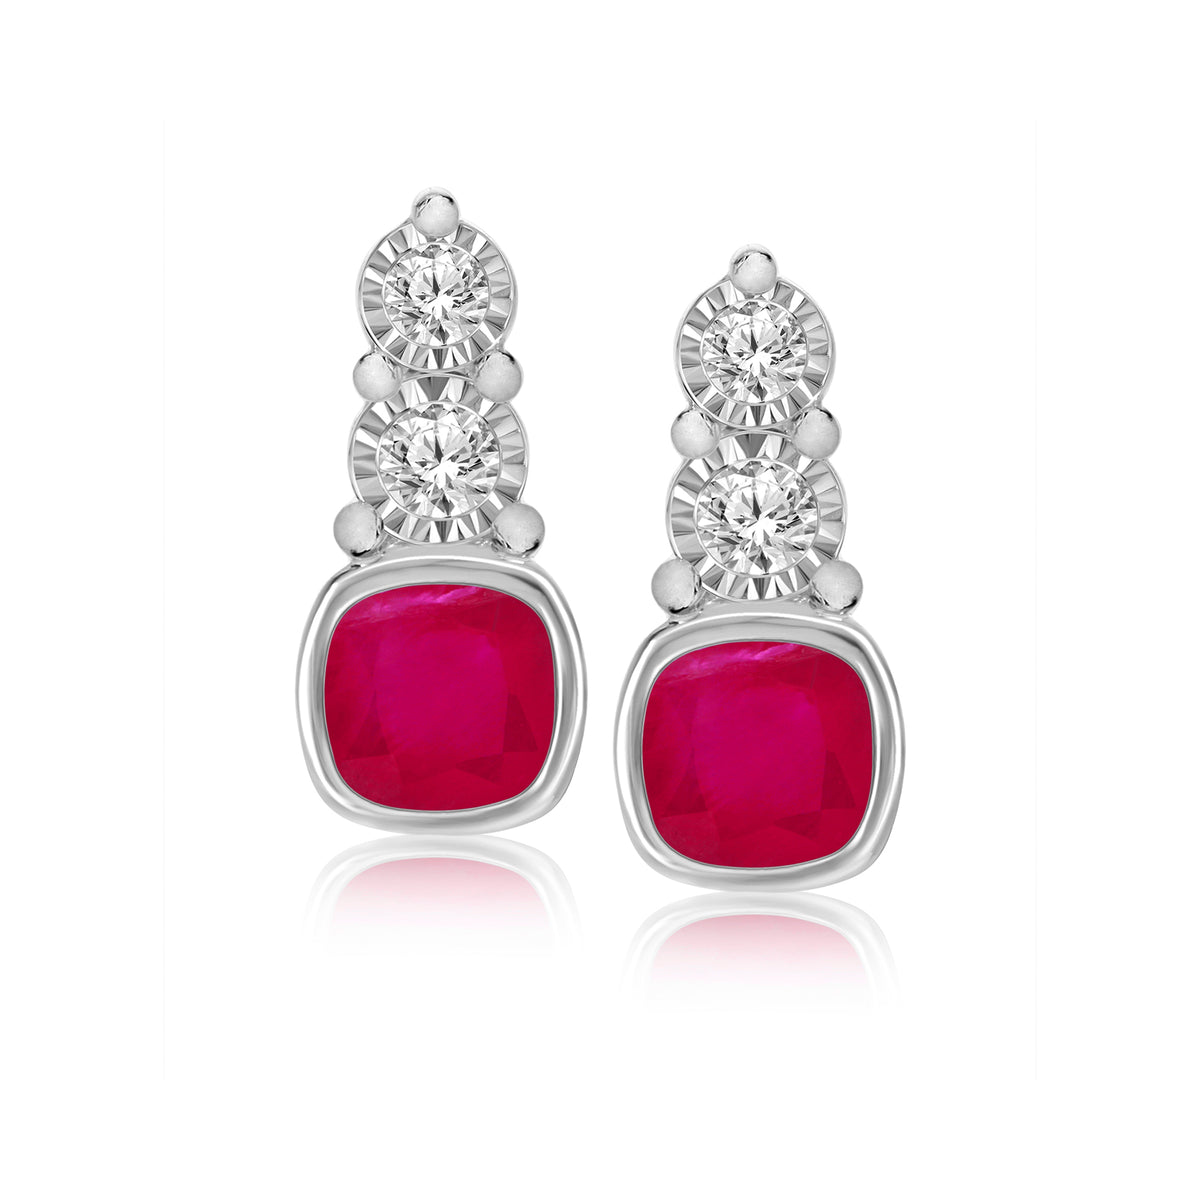 9ct white gold 4mm cushion shape ruby &amp; miracle plate diamond studs earrings 0.06ct